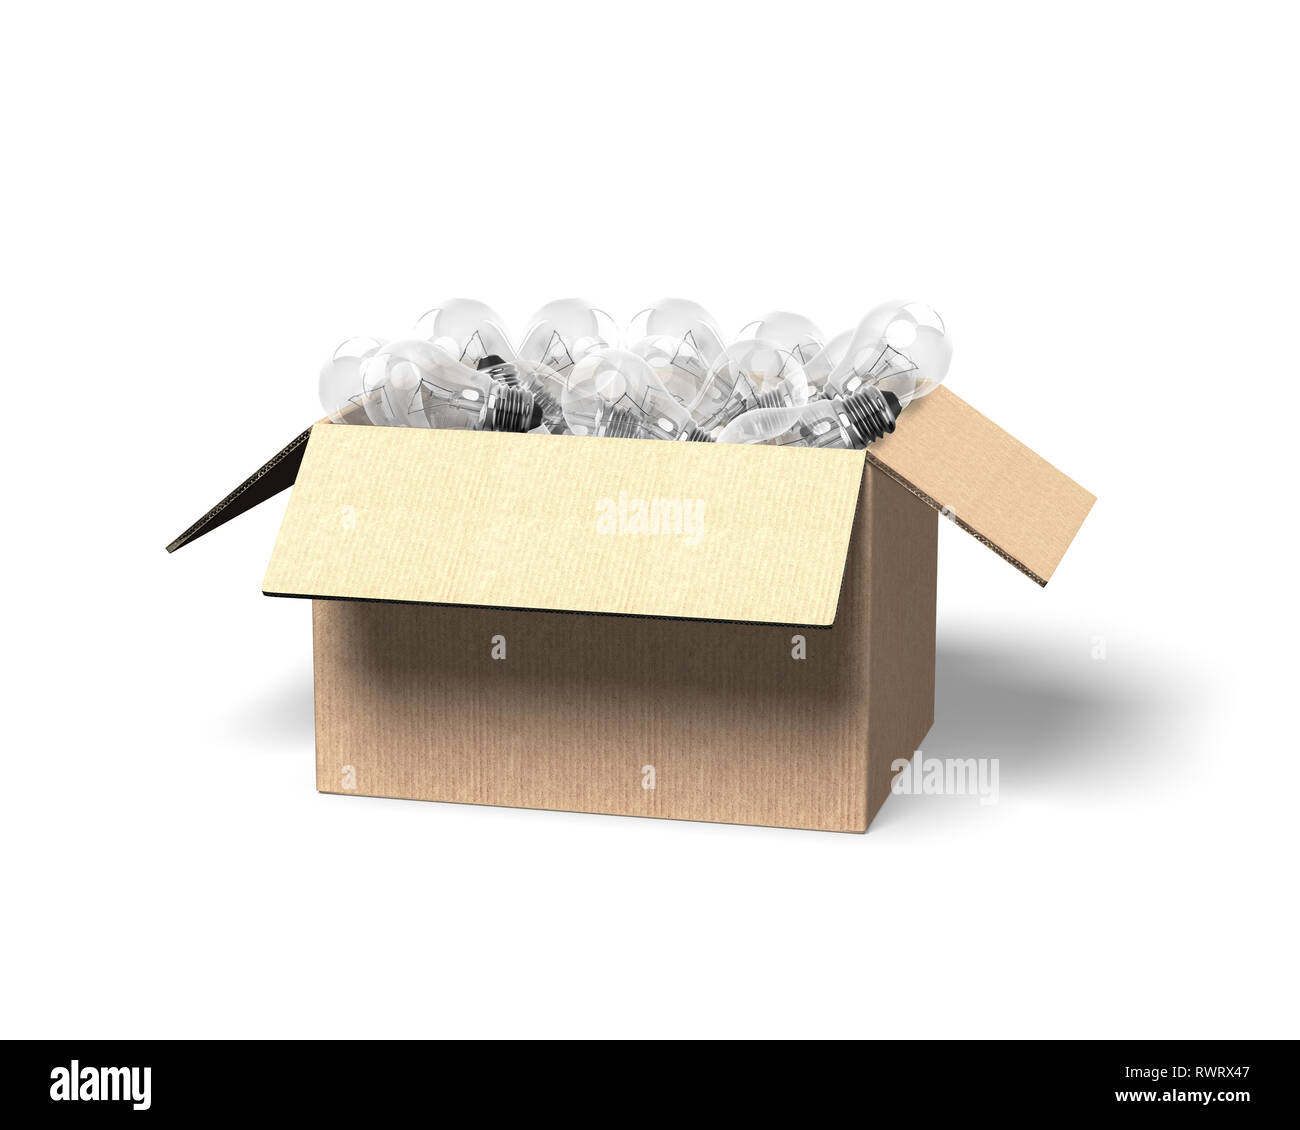 Opened cardboard box with light bulbs, isolated on white background, 3D illustration. Stock Photo